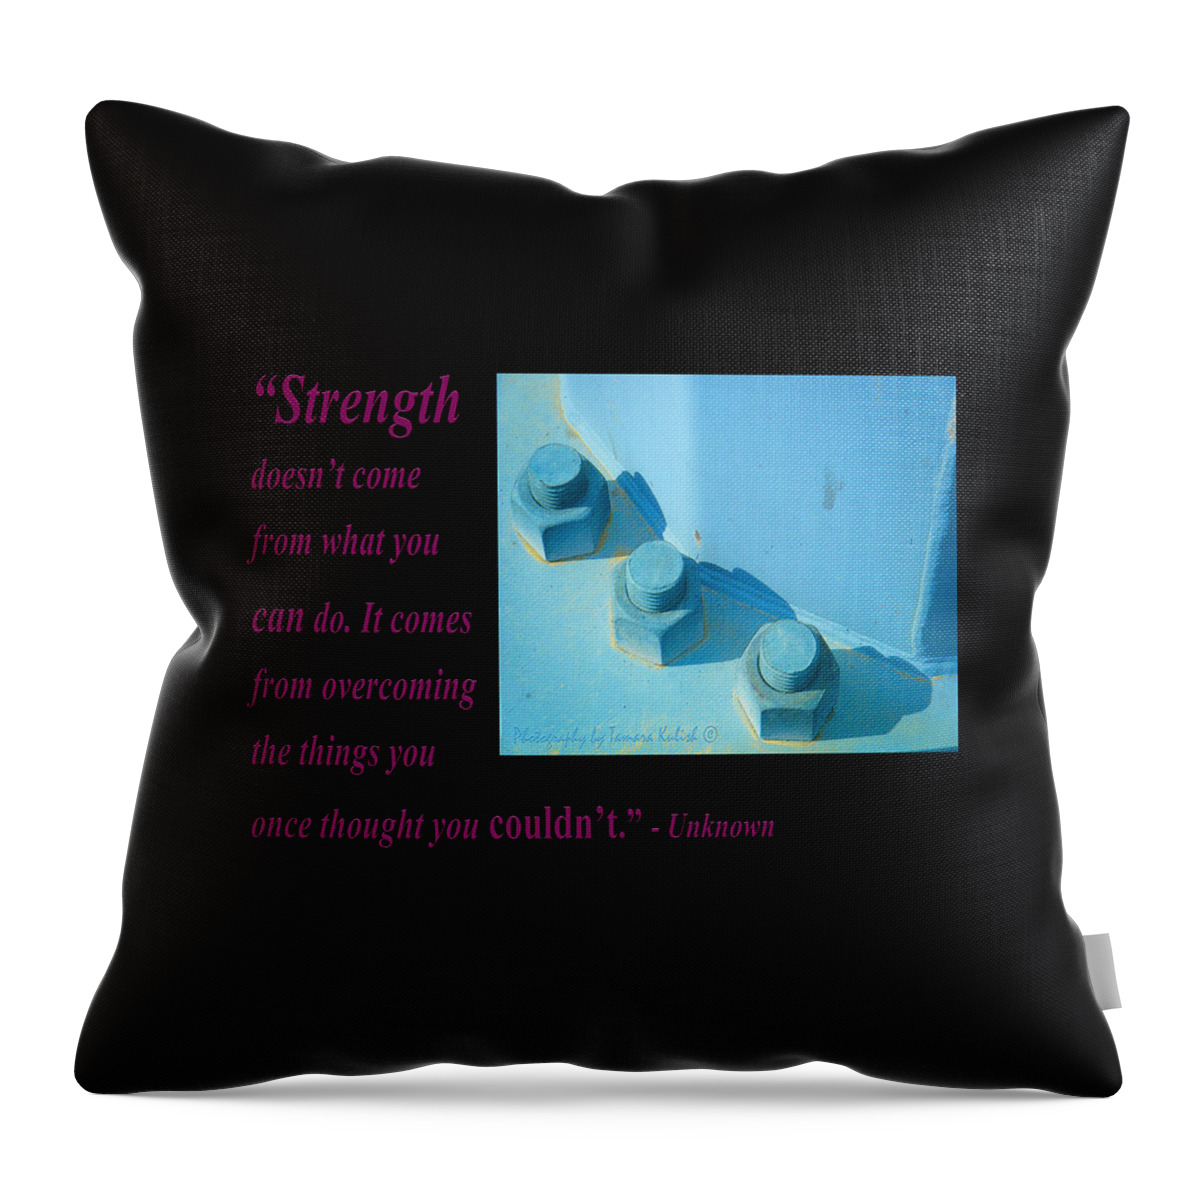 Arizona Throw Pillow featuring the photograph Strength Doesnt Come From What You Can Do by Tamara Kulish